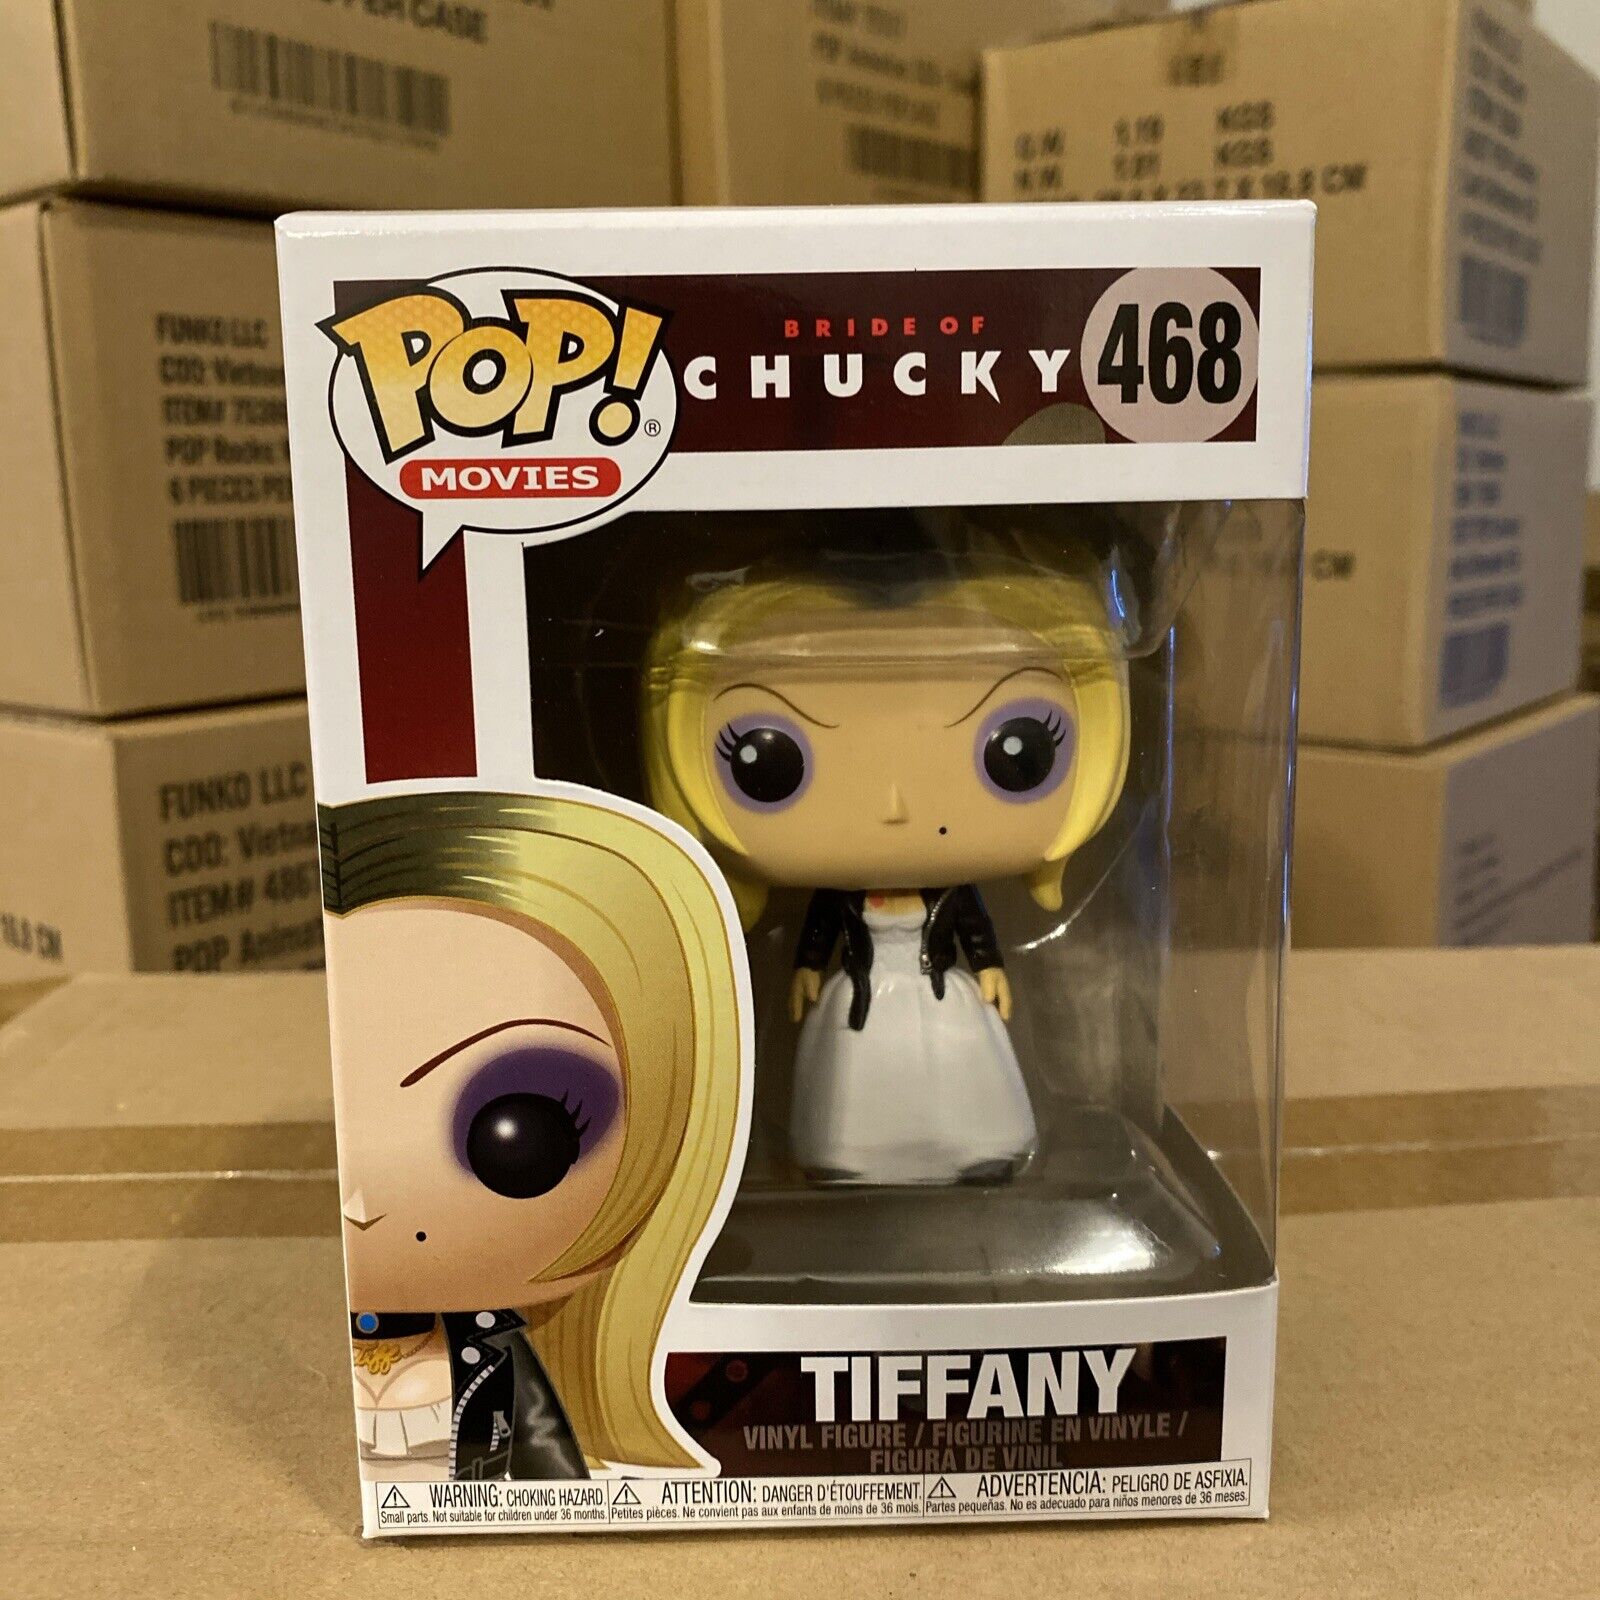 Funko Pop Bride of Chucky - Tiffany - Horror - Movies #468 - Vaulted - In Stock